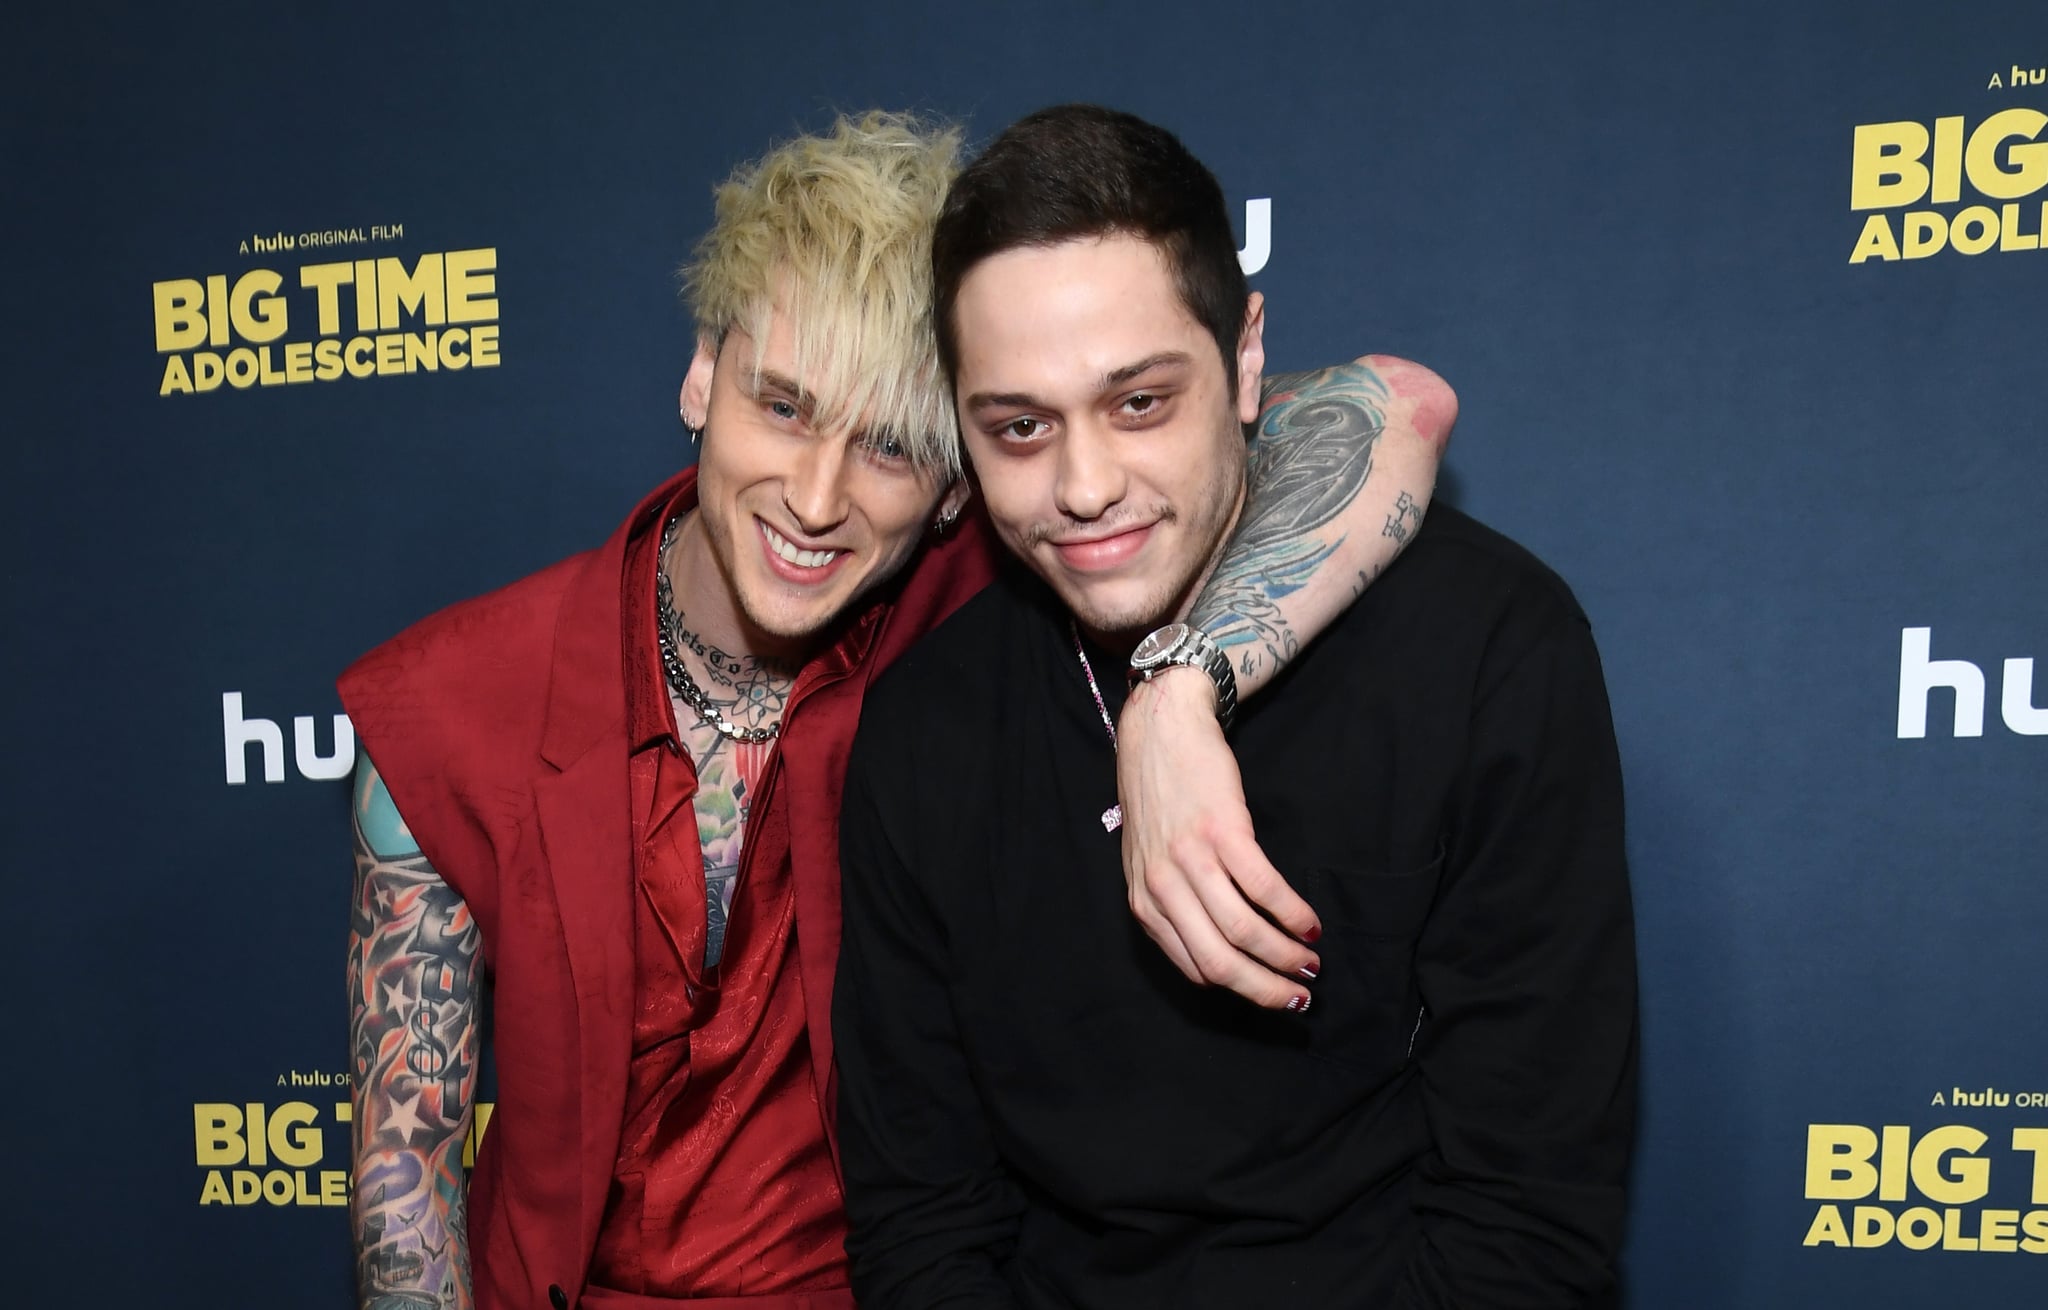 NEW YORK, NEW YORK - MARCH 05: Colson Baker AKA Machine Gun Kelly and Pete Davidson attend the premiere of 